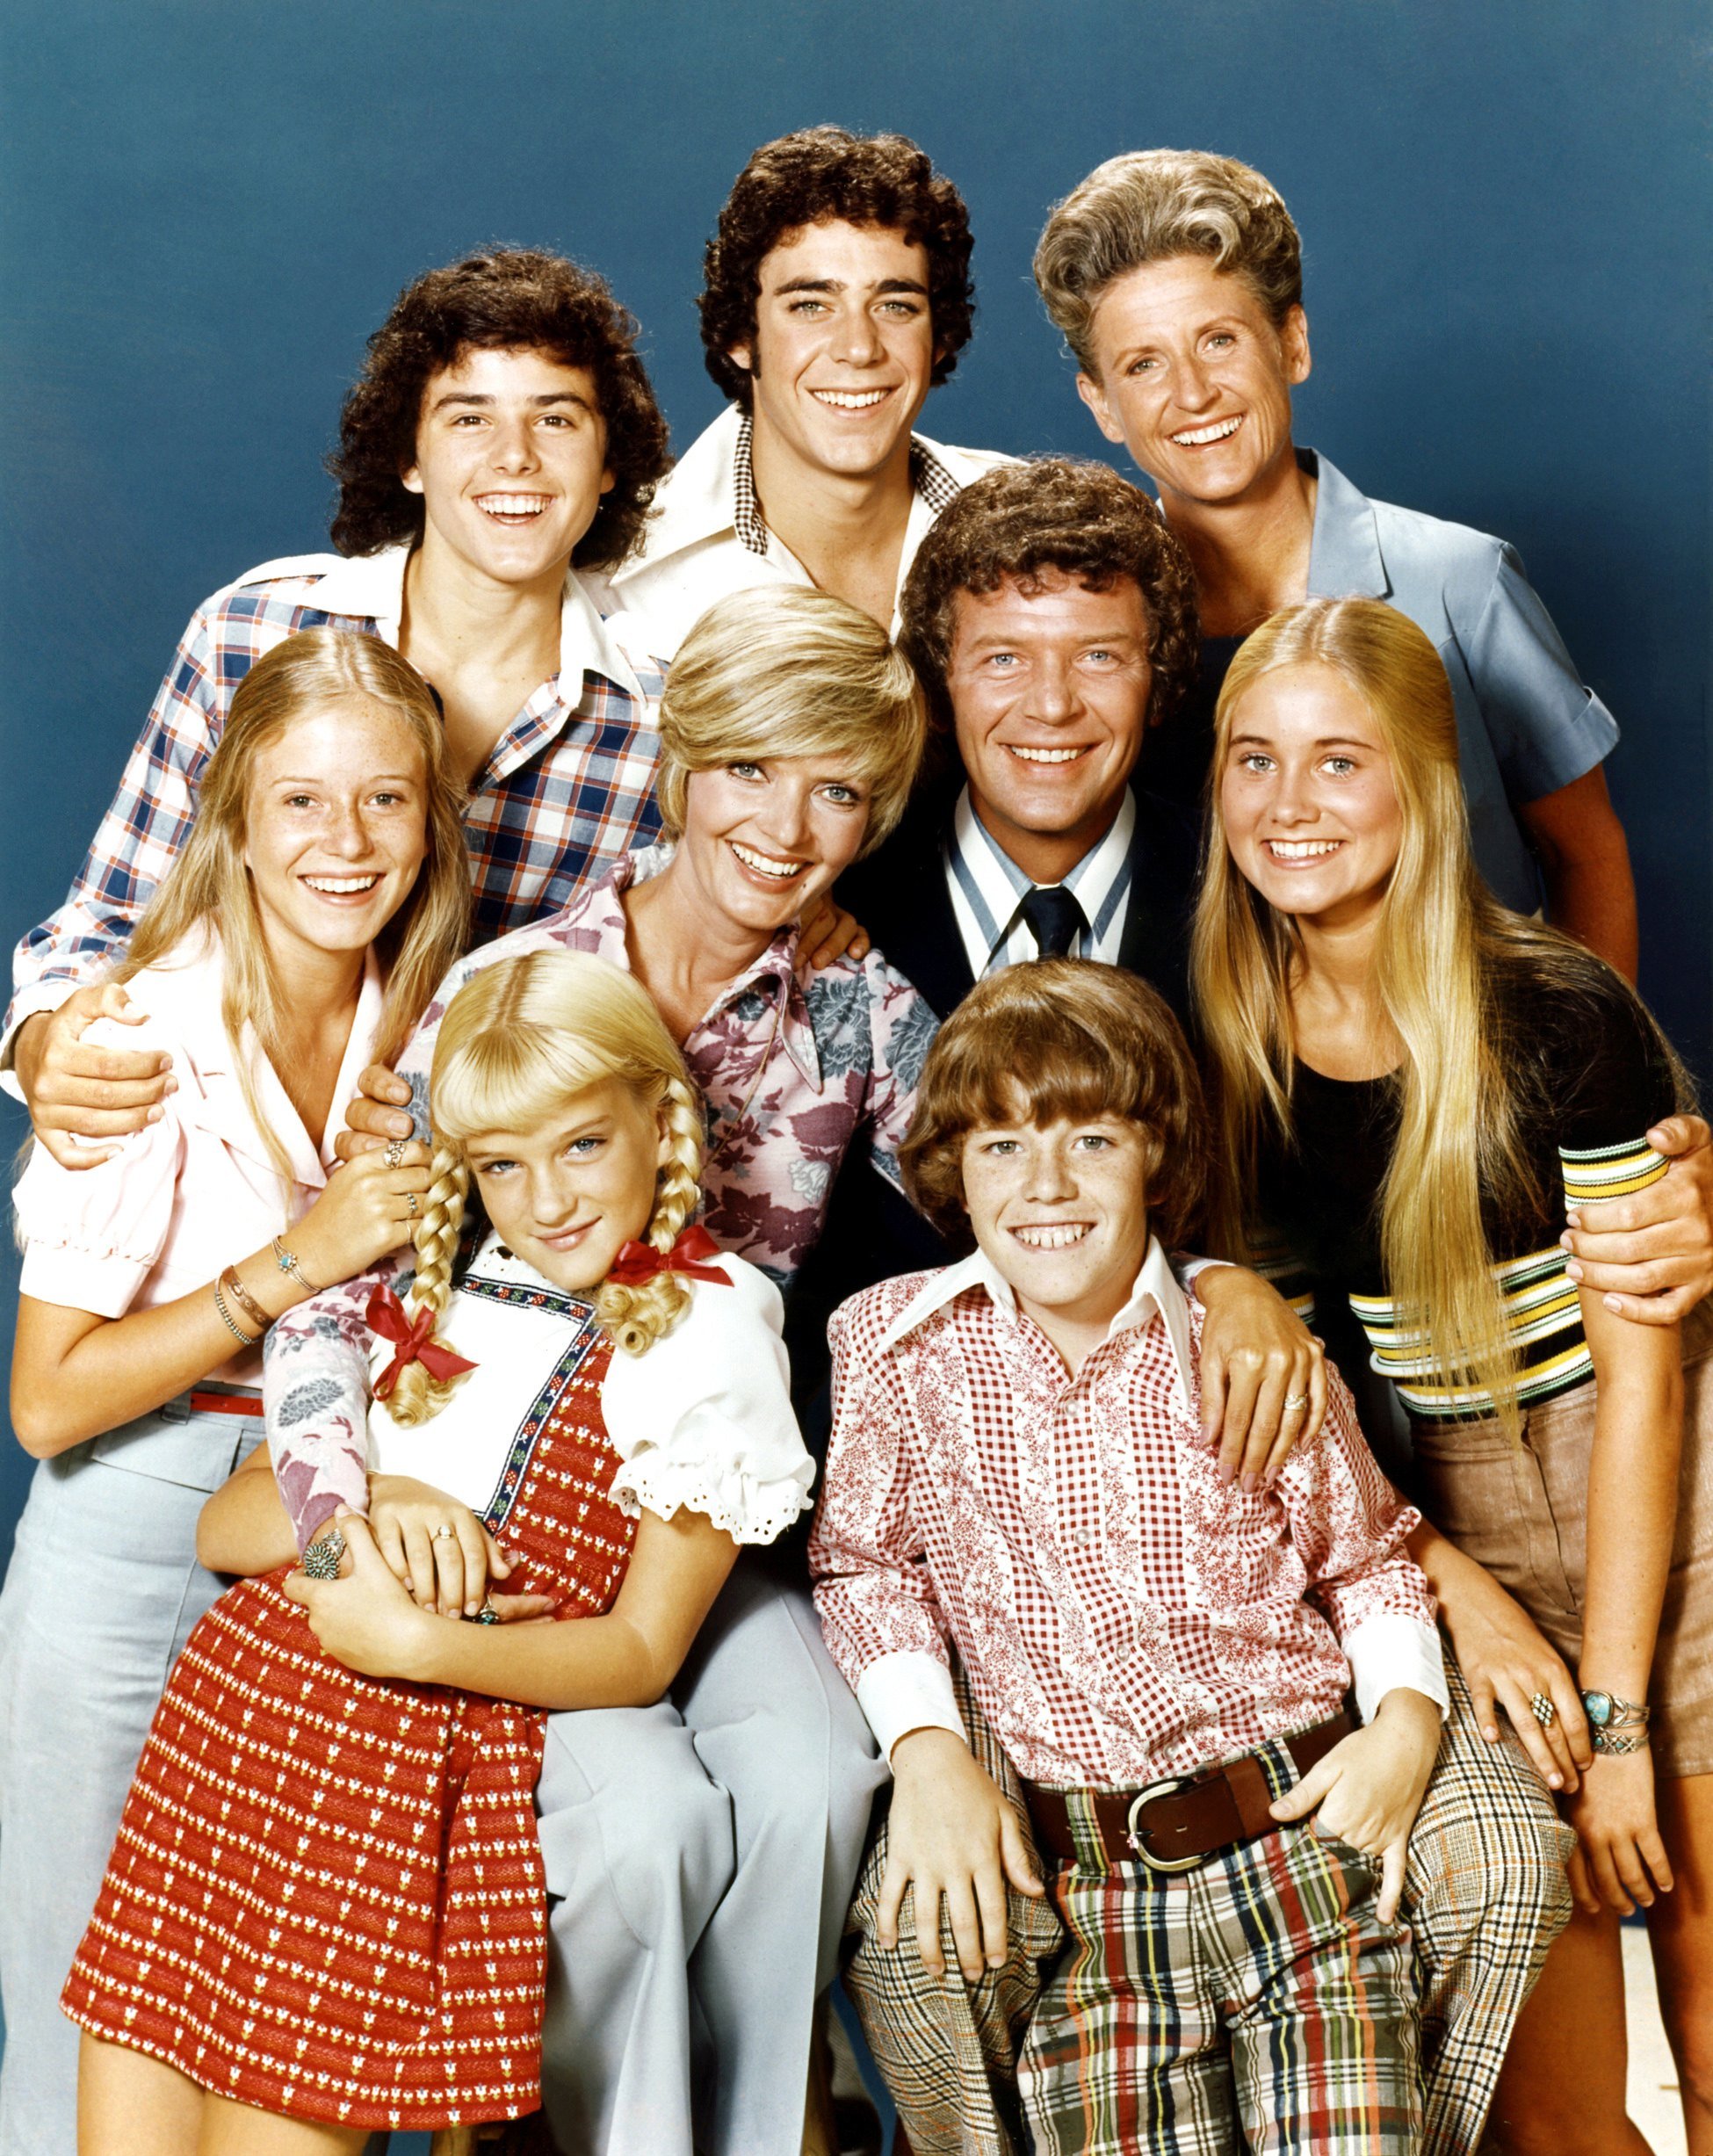 Cast of 'The Brady Bunch' | Christopher Knight, Barry Williams, Ann B. Davis; middle row: Eve Plumb, Florence Henderson, Robert Reed, Maureen McCormick; bottom row: Susan Olsen, Mike Lookinland 